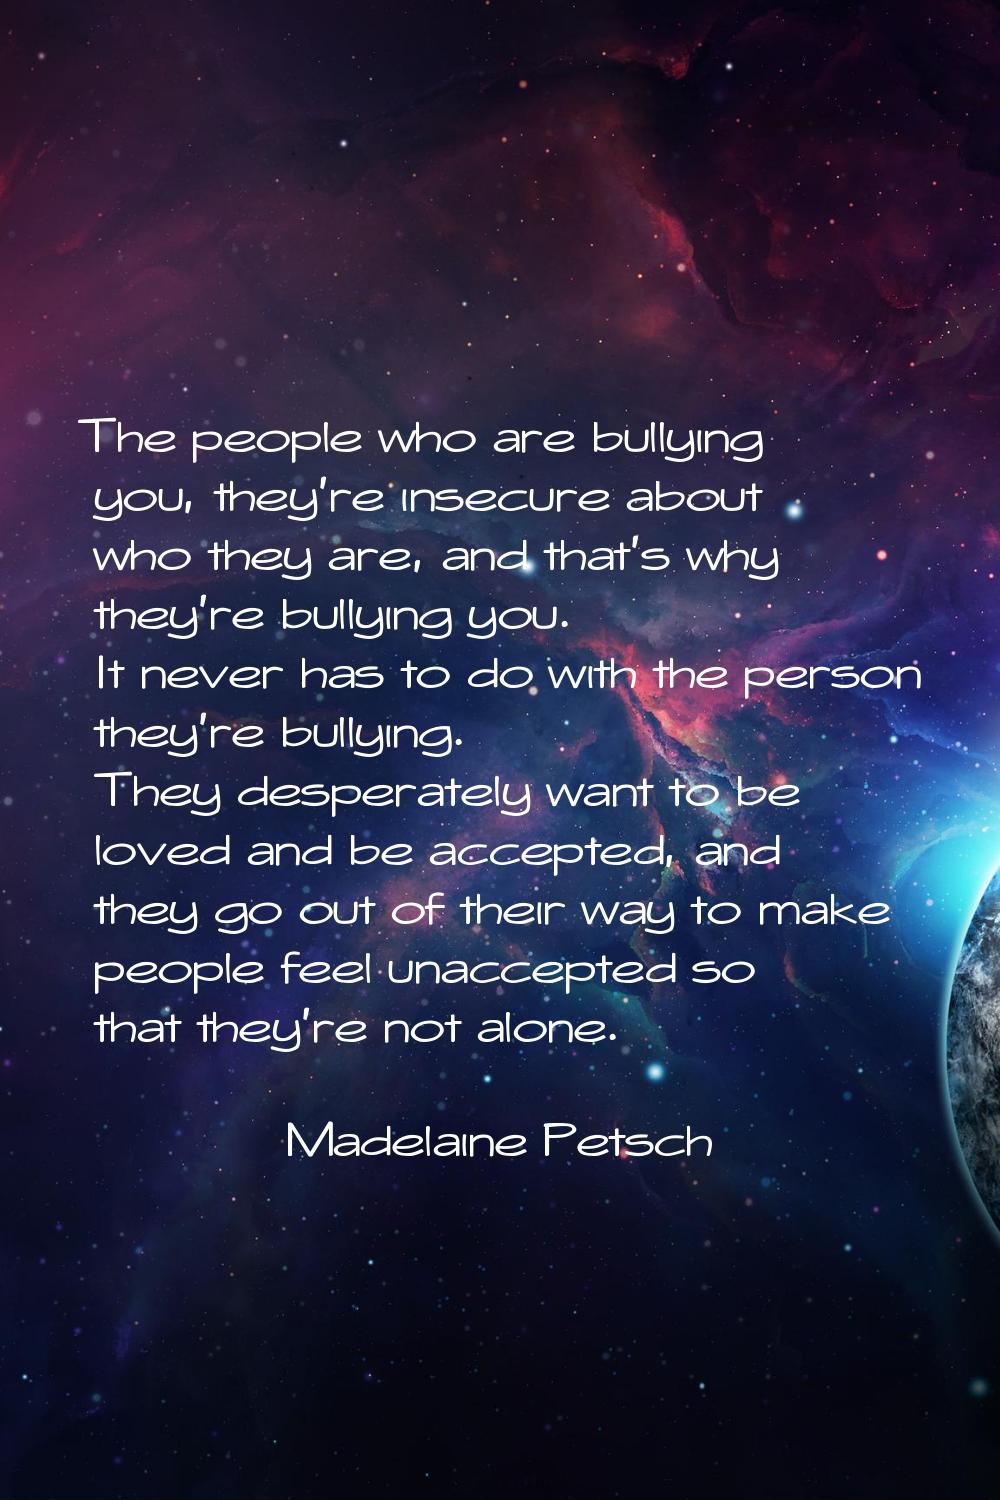 The people who are bullying you, they're insecure about who they are, and that's why they're bullyi